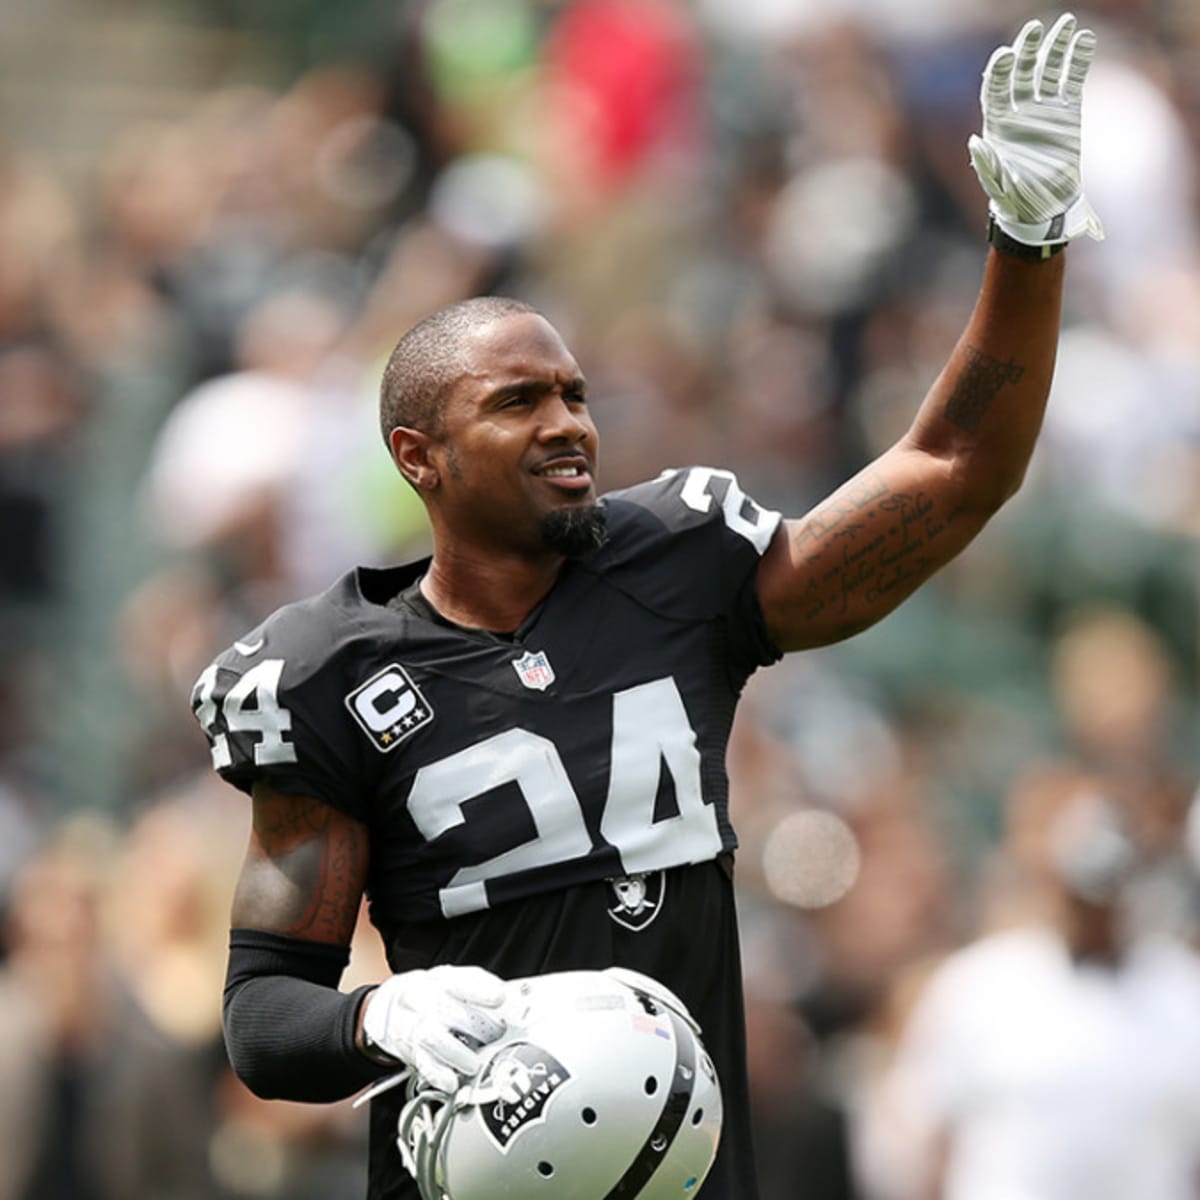 Raiders' Charles Woodson to retire after 18th season